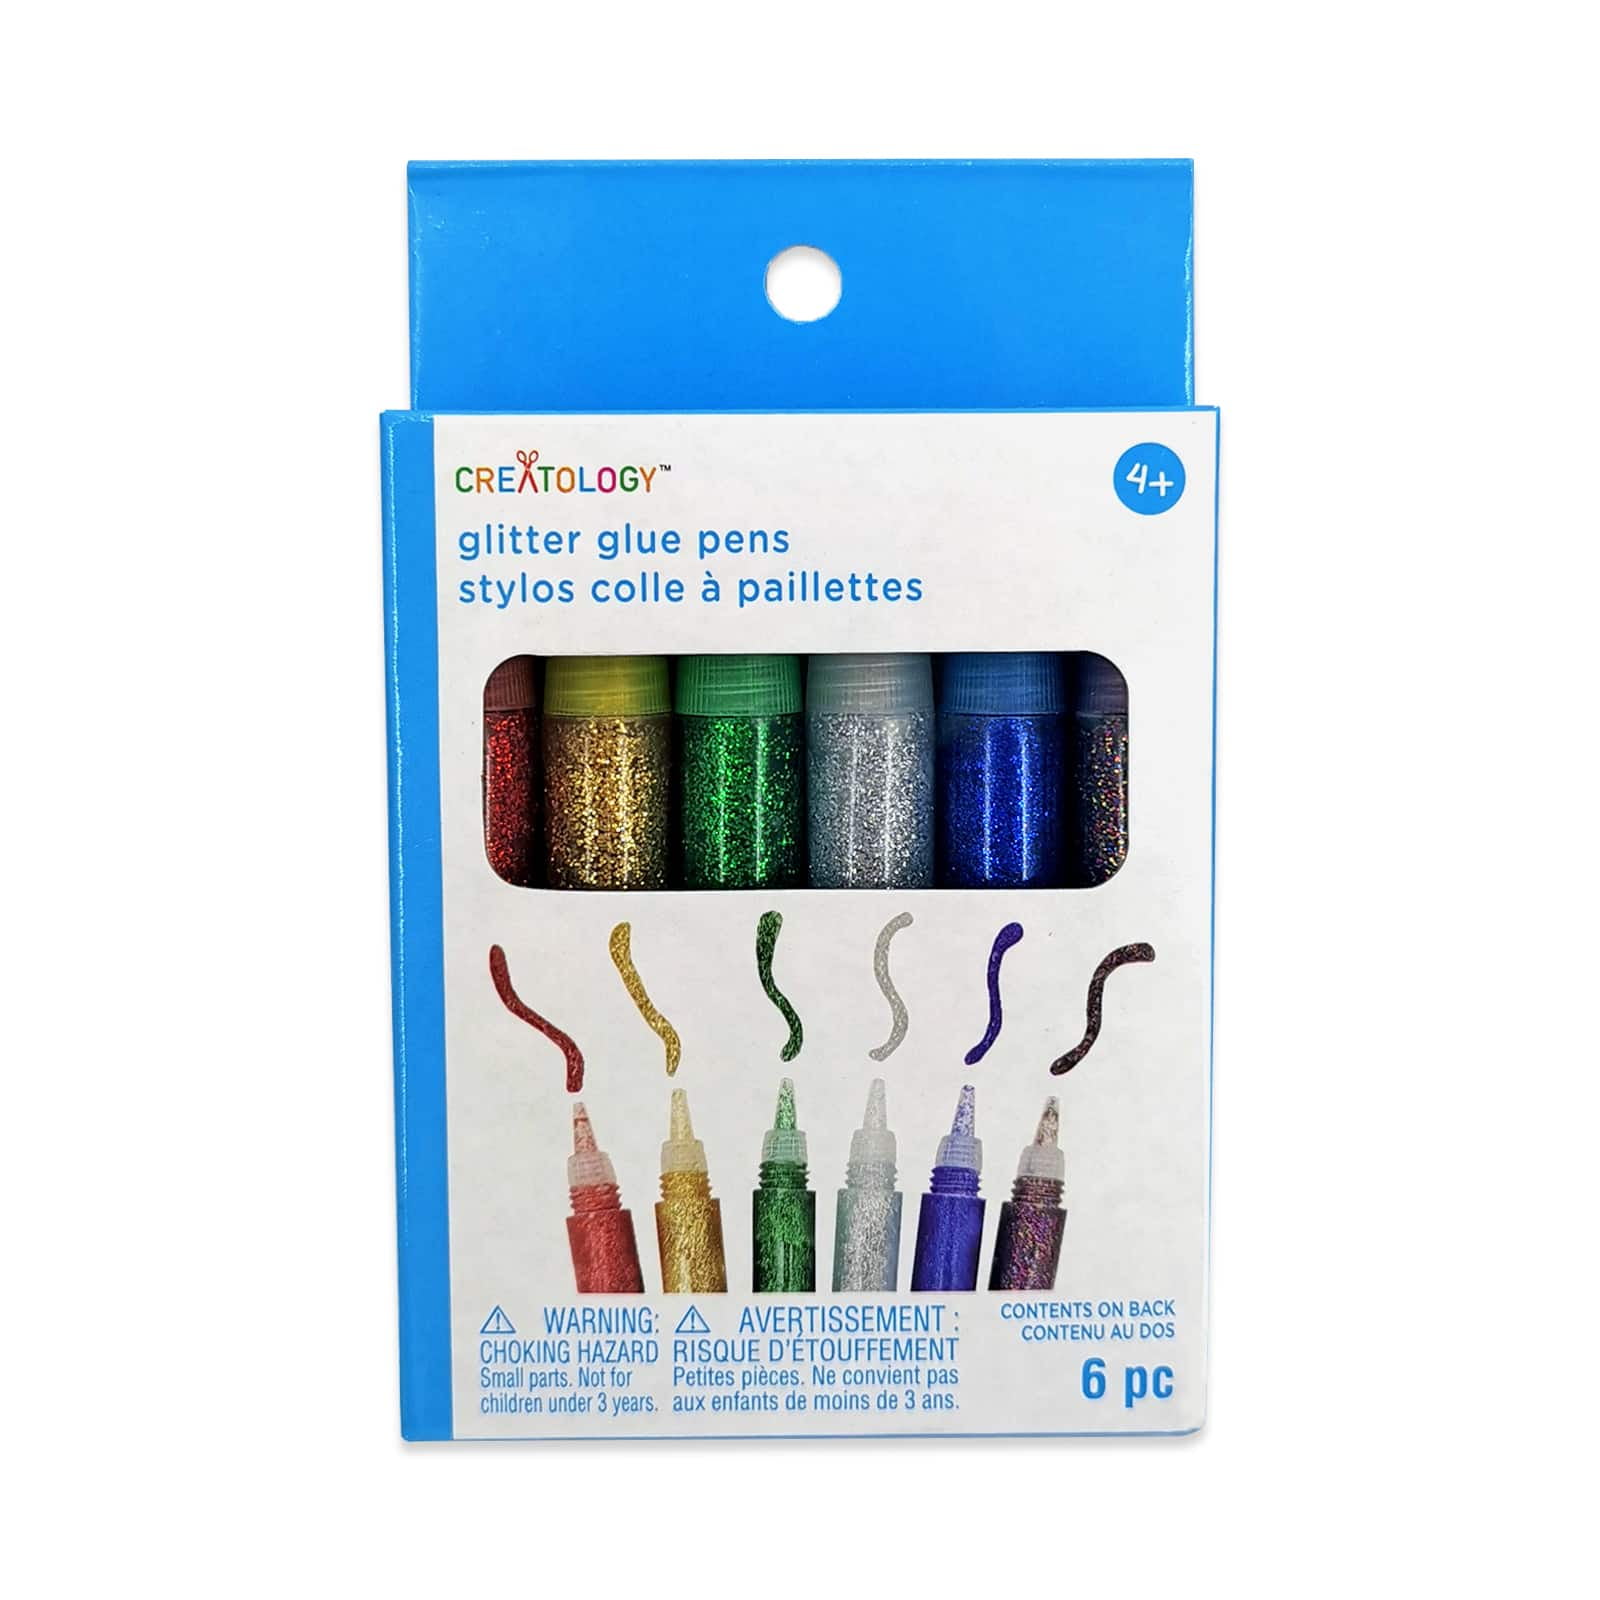 12 Packs: 15 ct. (180 Total) Glitter Glue Pens by Creatology™